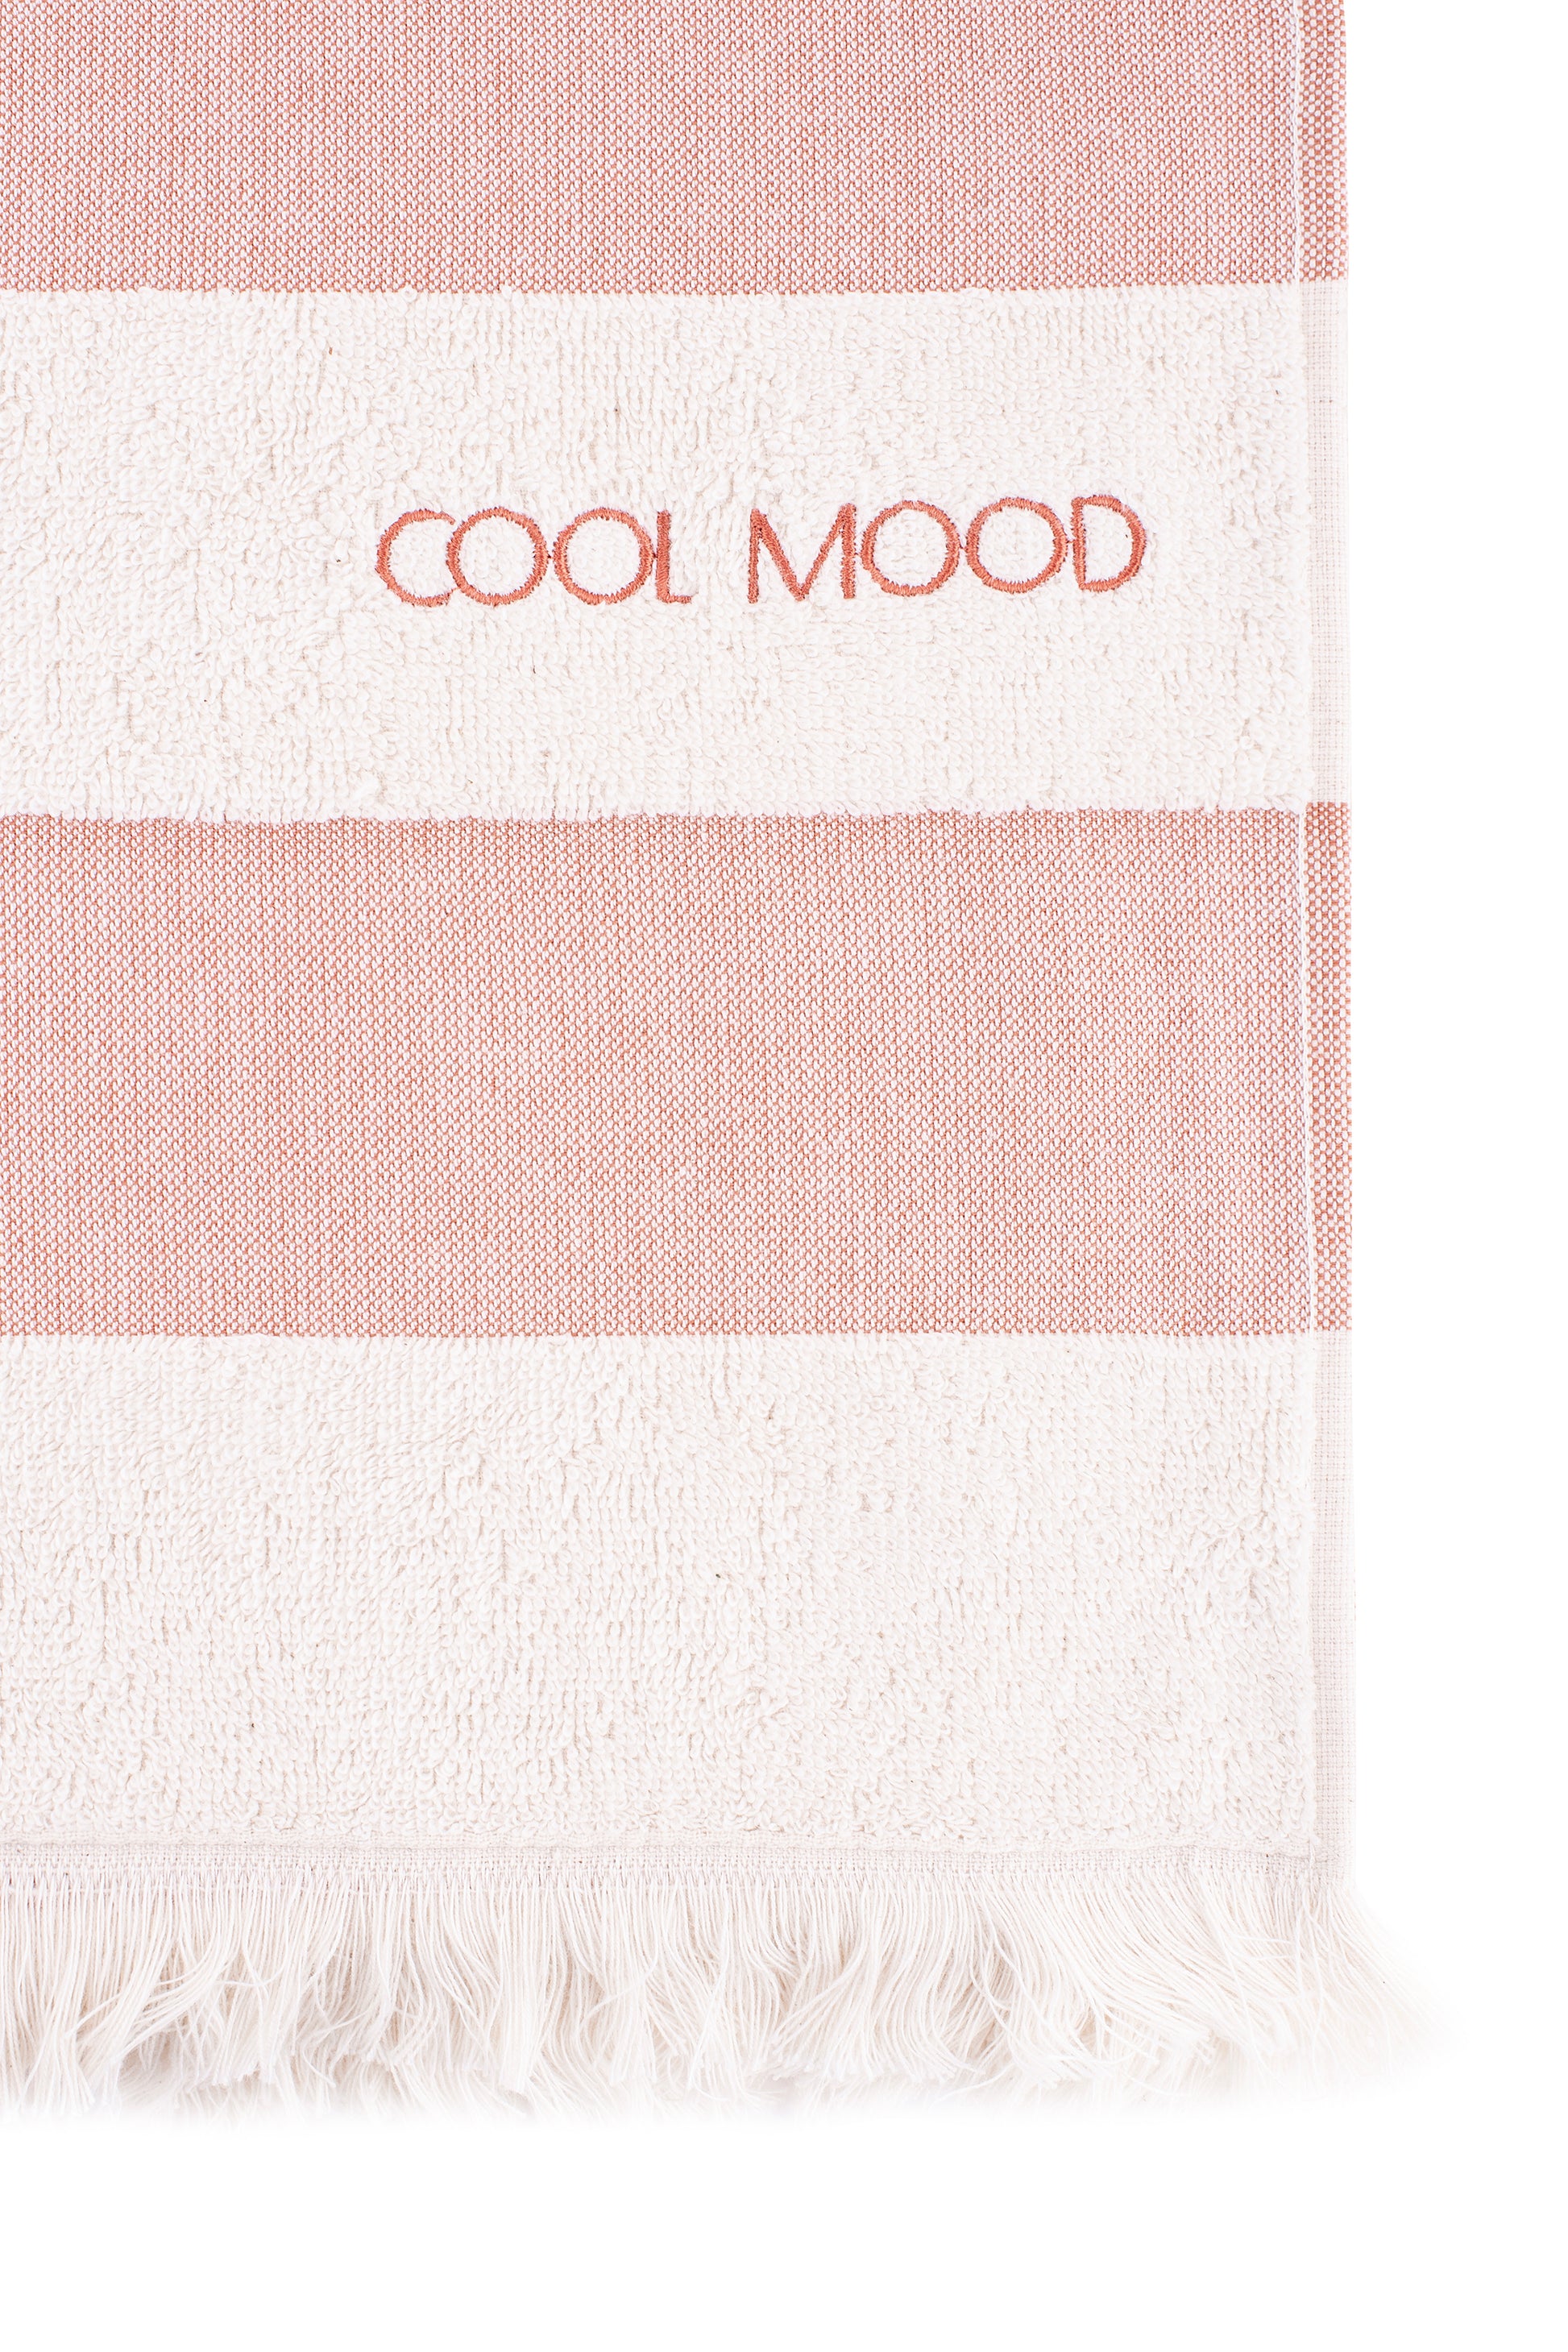 Beach towel in rust shade, with soft terry stripes, eyelash fringing detail and embroidery in rust.